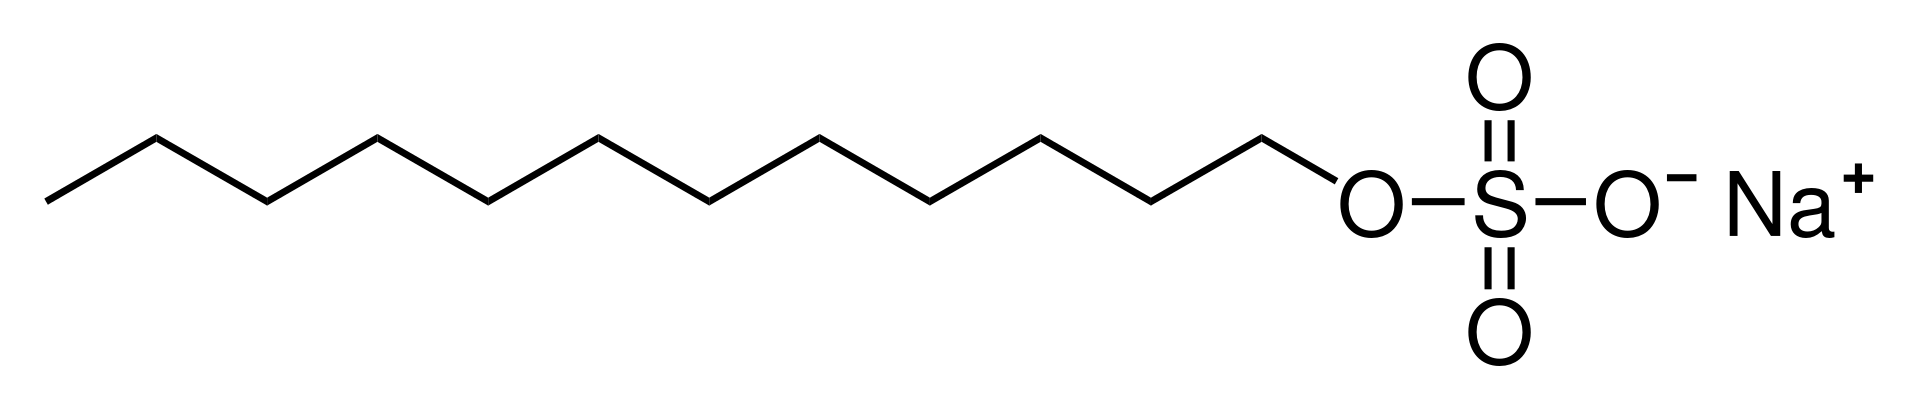 Chemical structure of SDS